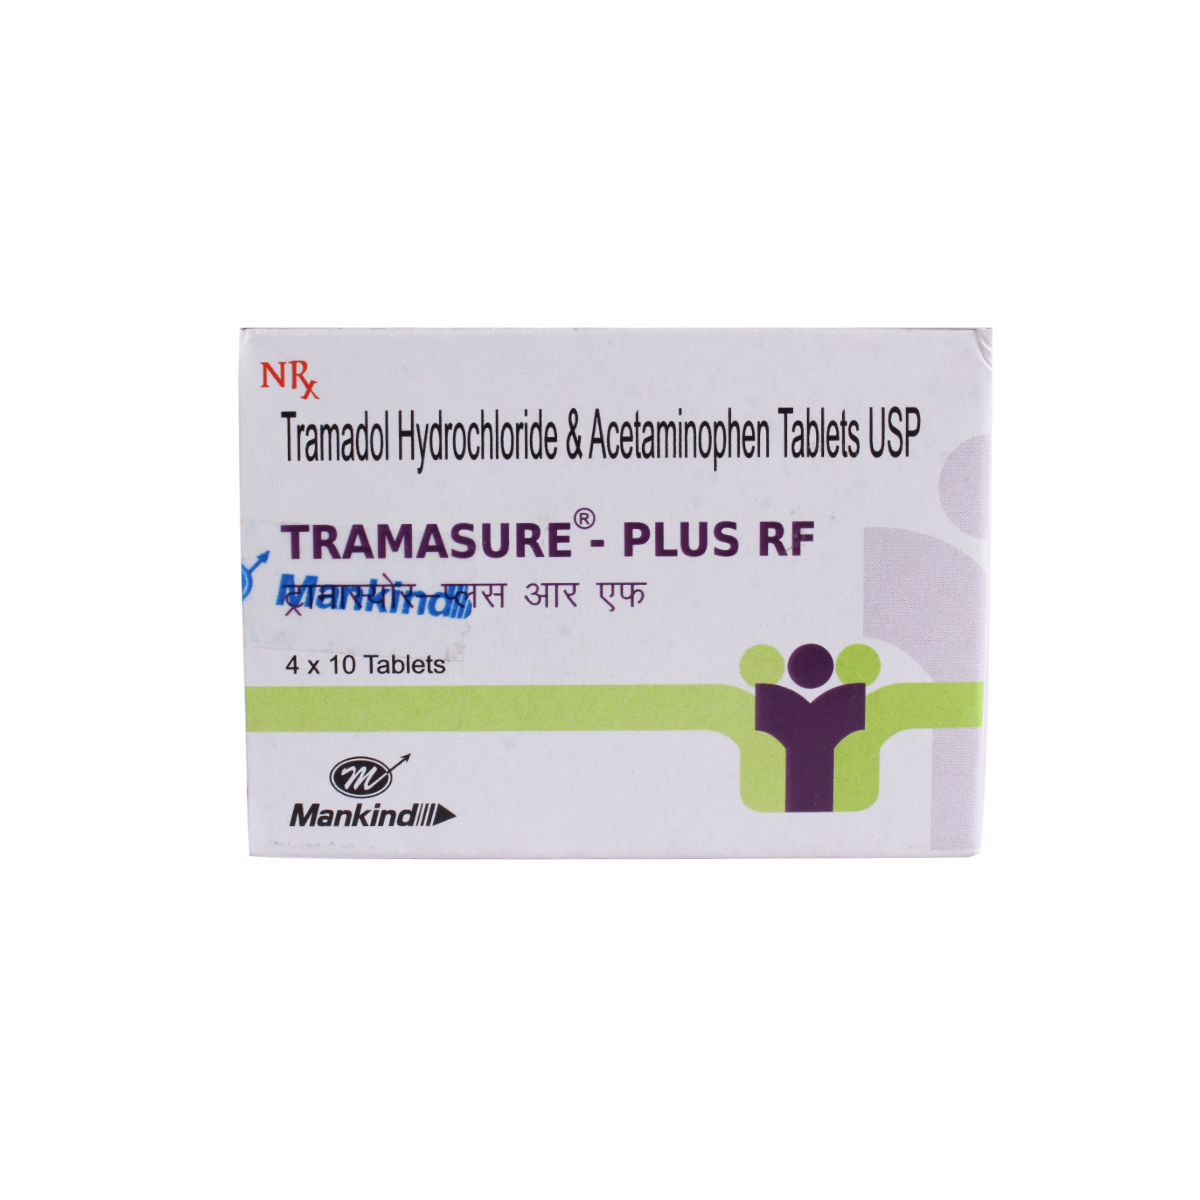 TramasurePlus Rf Tablet 10's Price, Uses, Side Effects, Composition